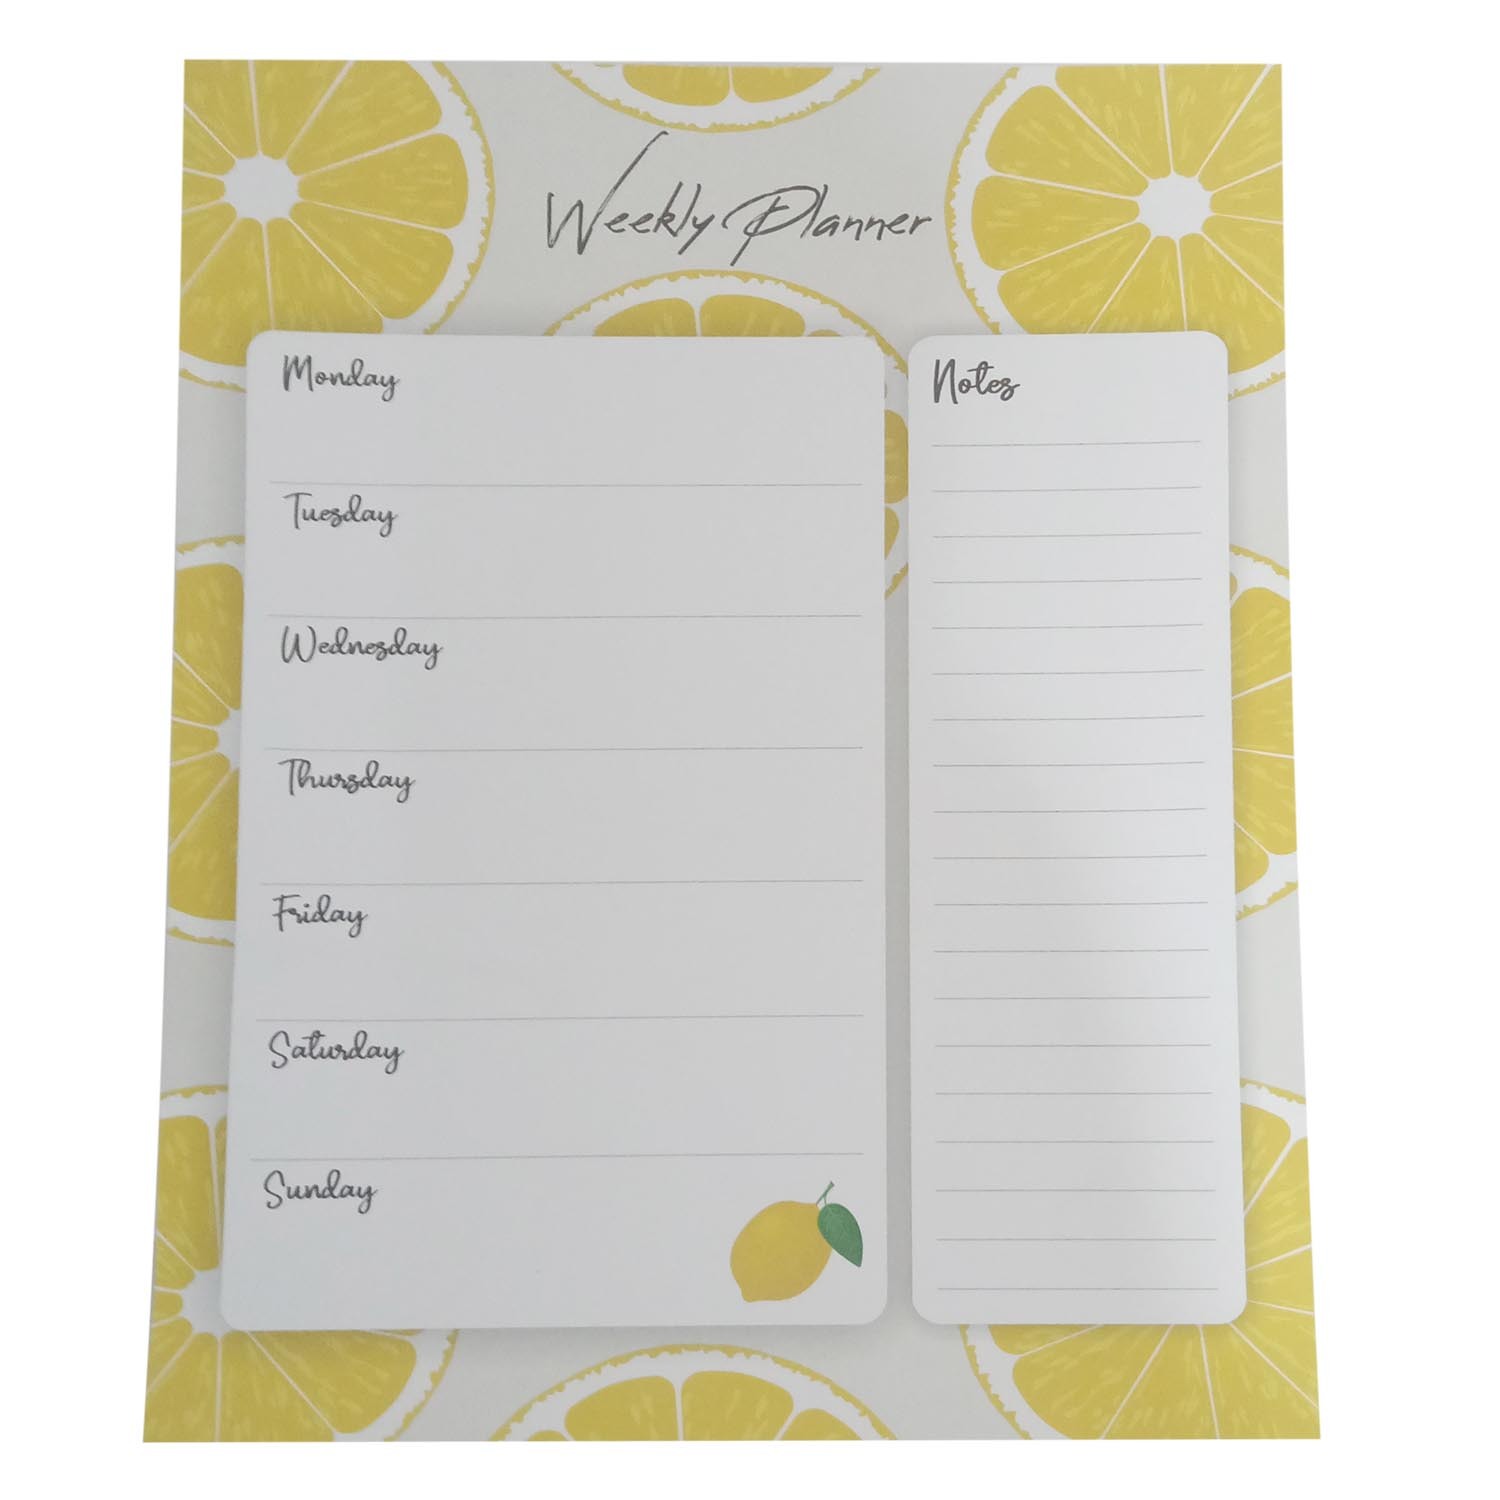 Weekly Planner A5 Image 3